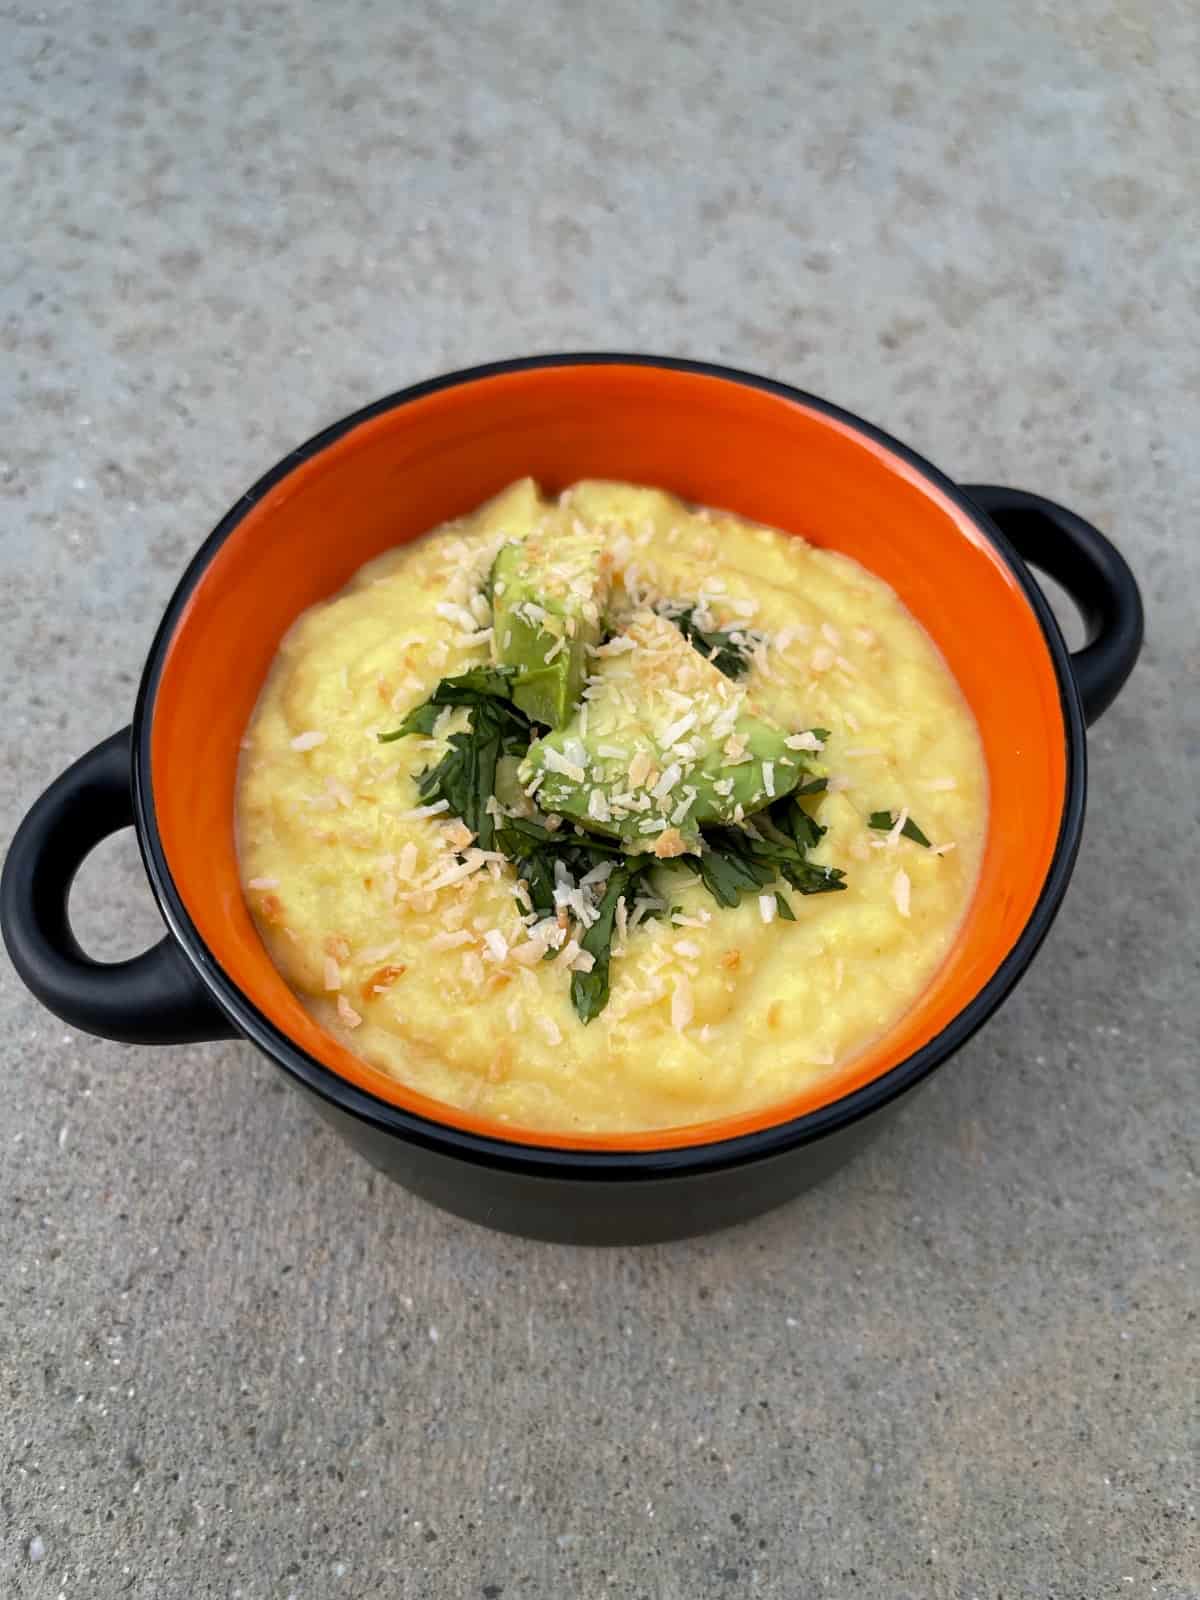 Chilled Coconut Corn Soup garnished with cilantro, avocado and toasted coconut in orange soup crock.